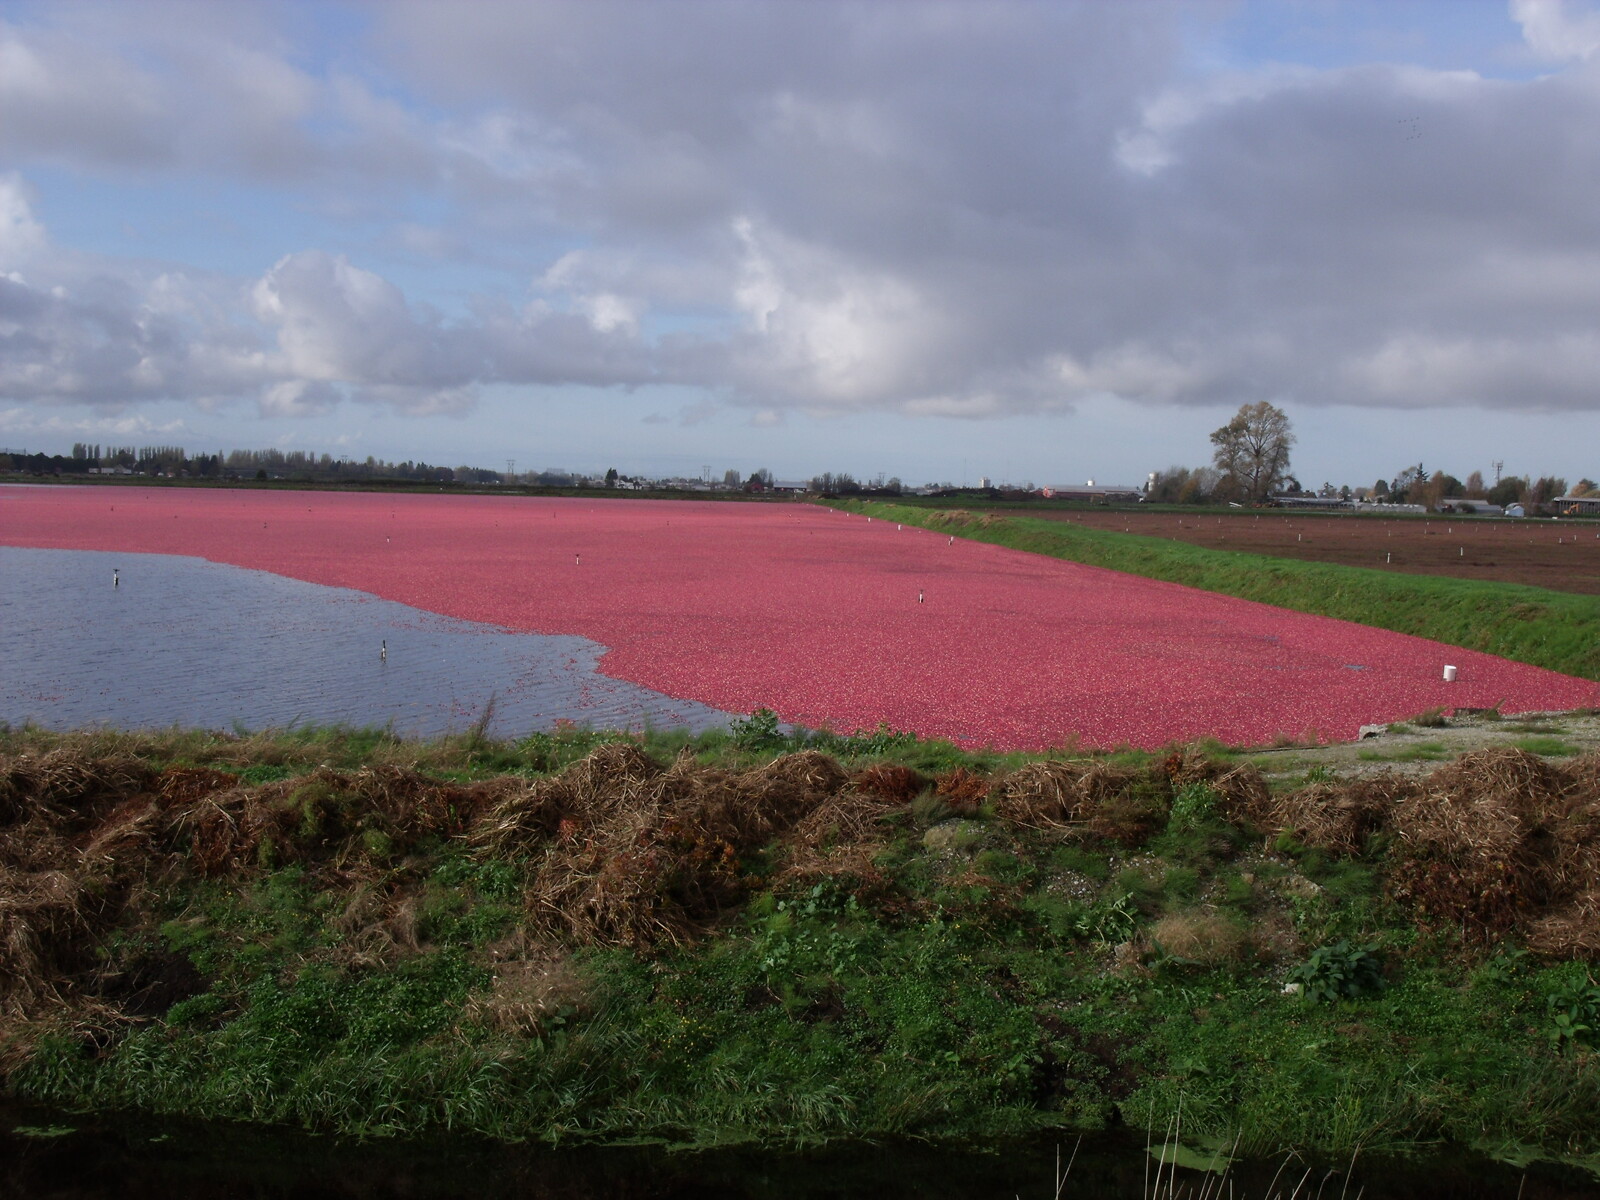 KSB submersible motor pumps support cranberry cultivation